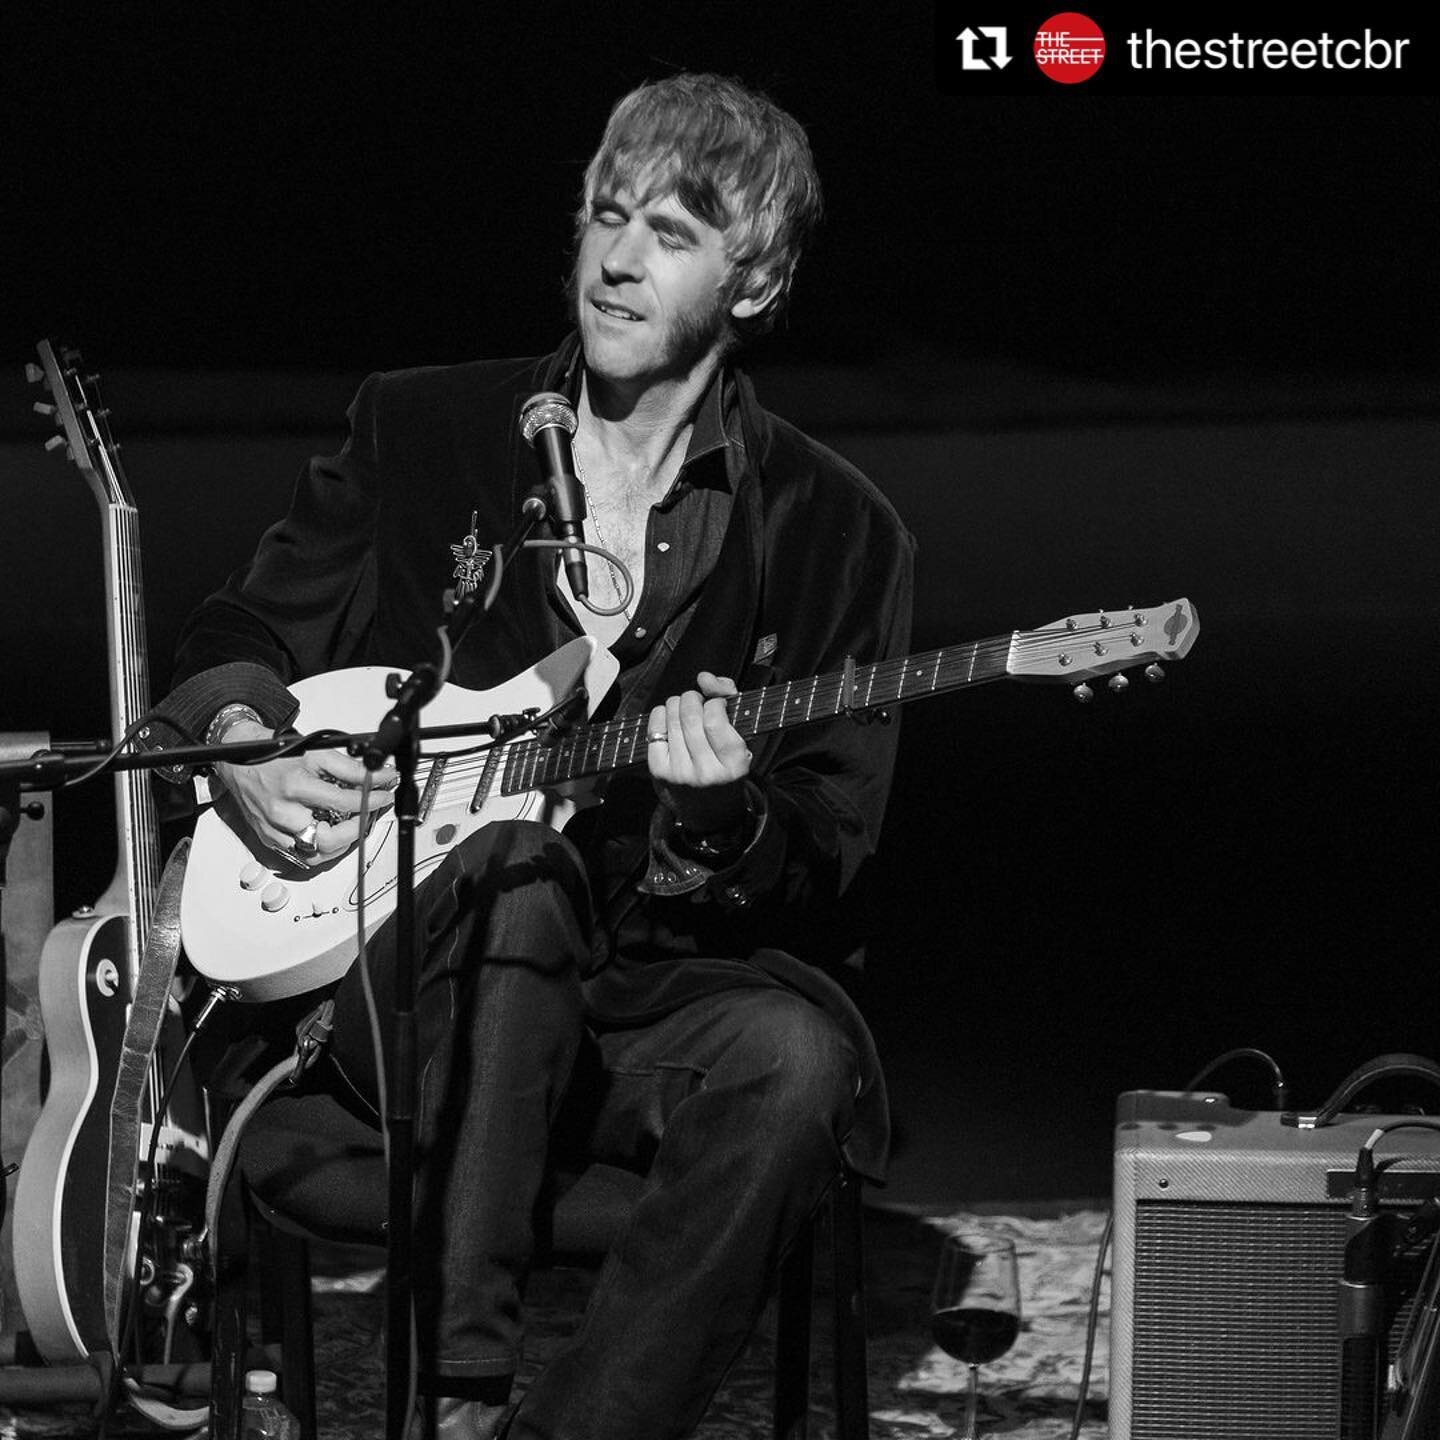 Thank you @thestreetcbr for having us!

#Repost @thestreetcbr with @use.repost
・・・
First gig of the year where Heath&rsquo;s folk met Kevin&rsquo;s Americana was awesome. These guys put down the tone for the year. Adventurous music making, beautiful 